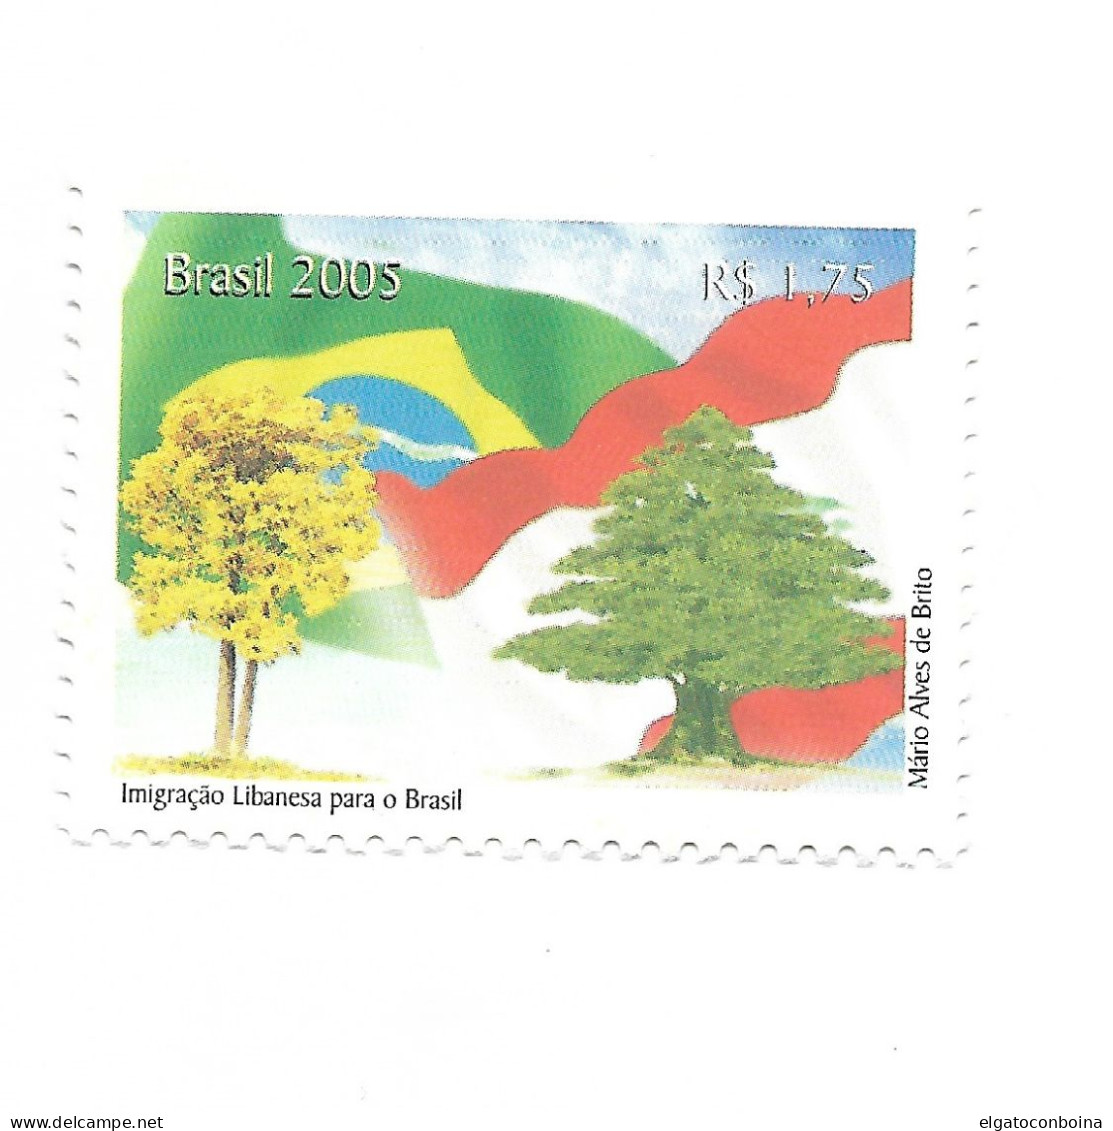 BRAZIL 2005 LIBANESE INMIGRATION TO BRAZIL FLAGS TREE CULTURES 1 VALUE MINT NH - Neufs